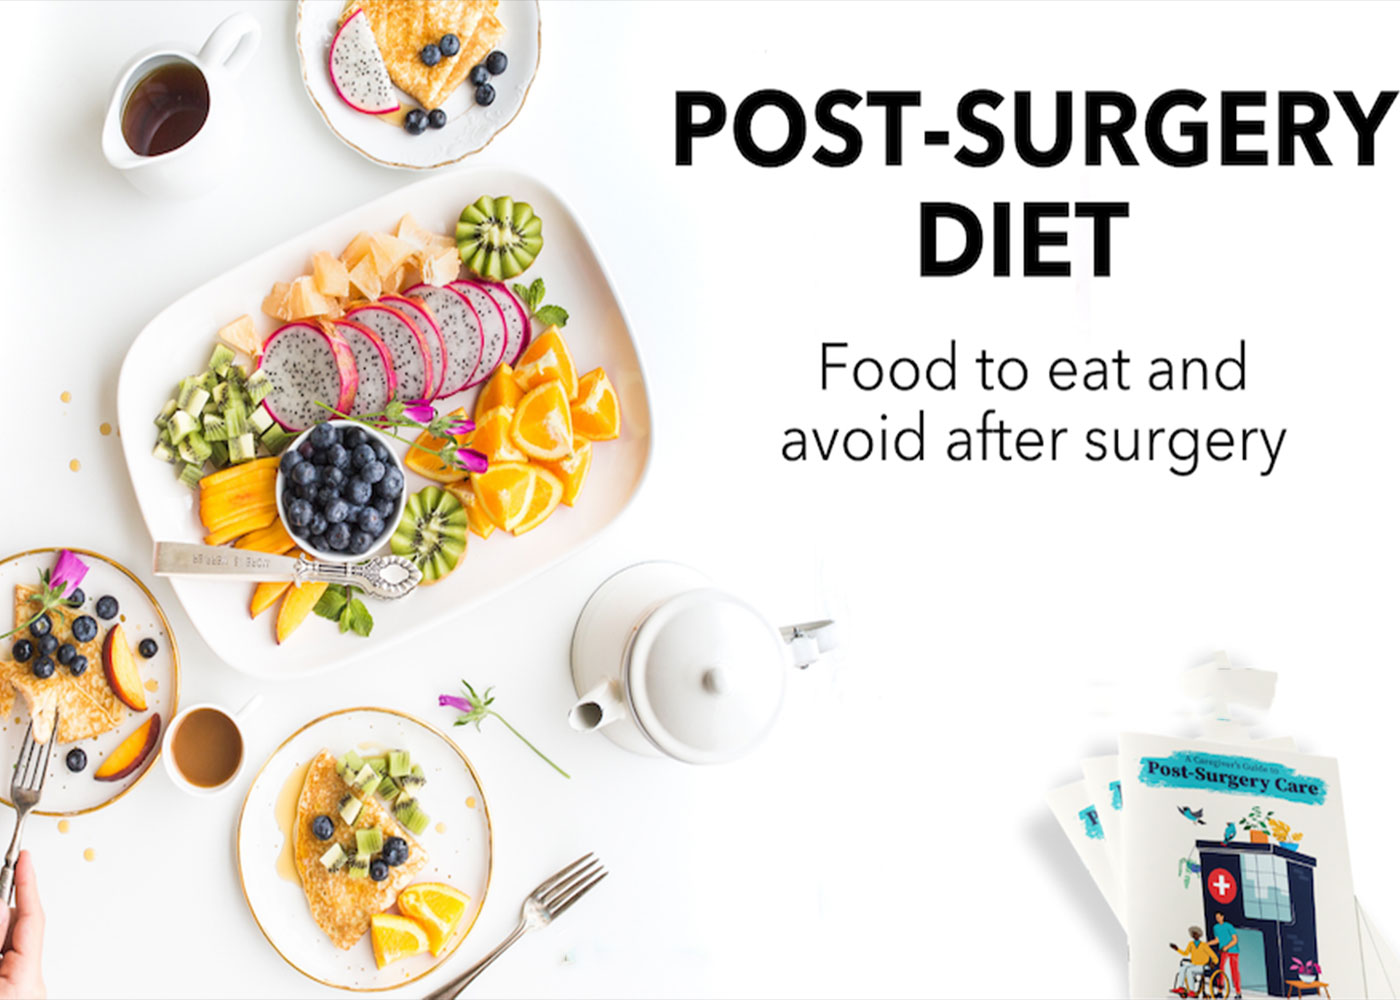 Energy Meal Plans Dubai: What to Eat After Surgery